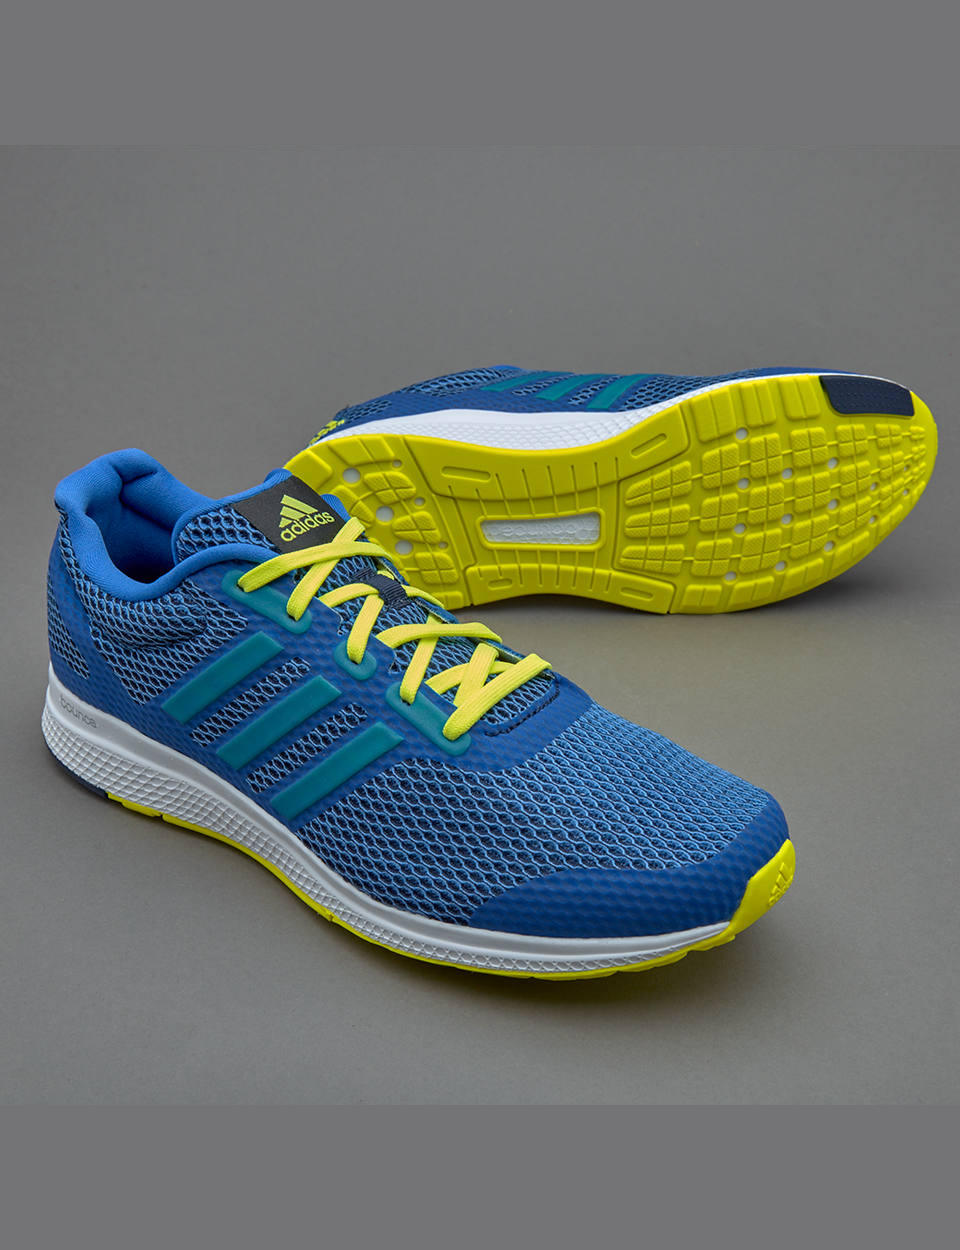 Adidas Running Shoes Sneakers Trainers mana bounce m Blue 2016 17 | eBay